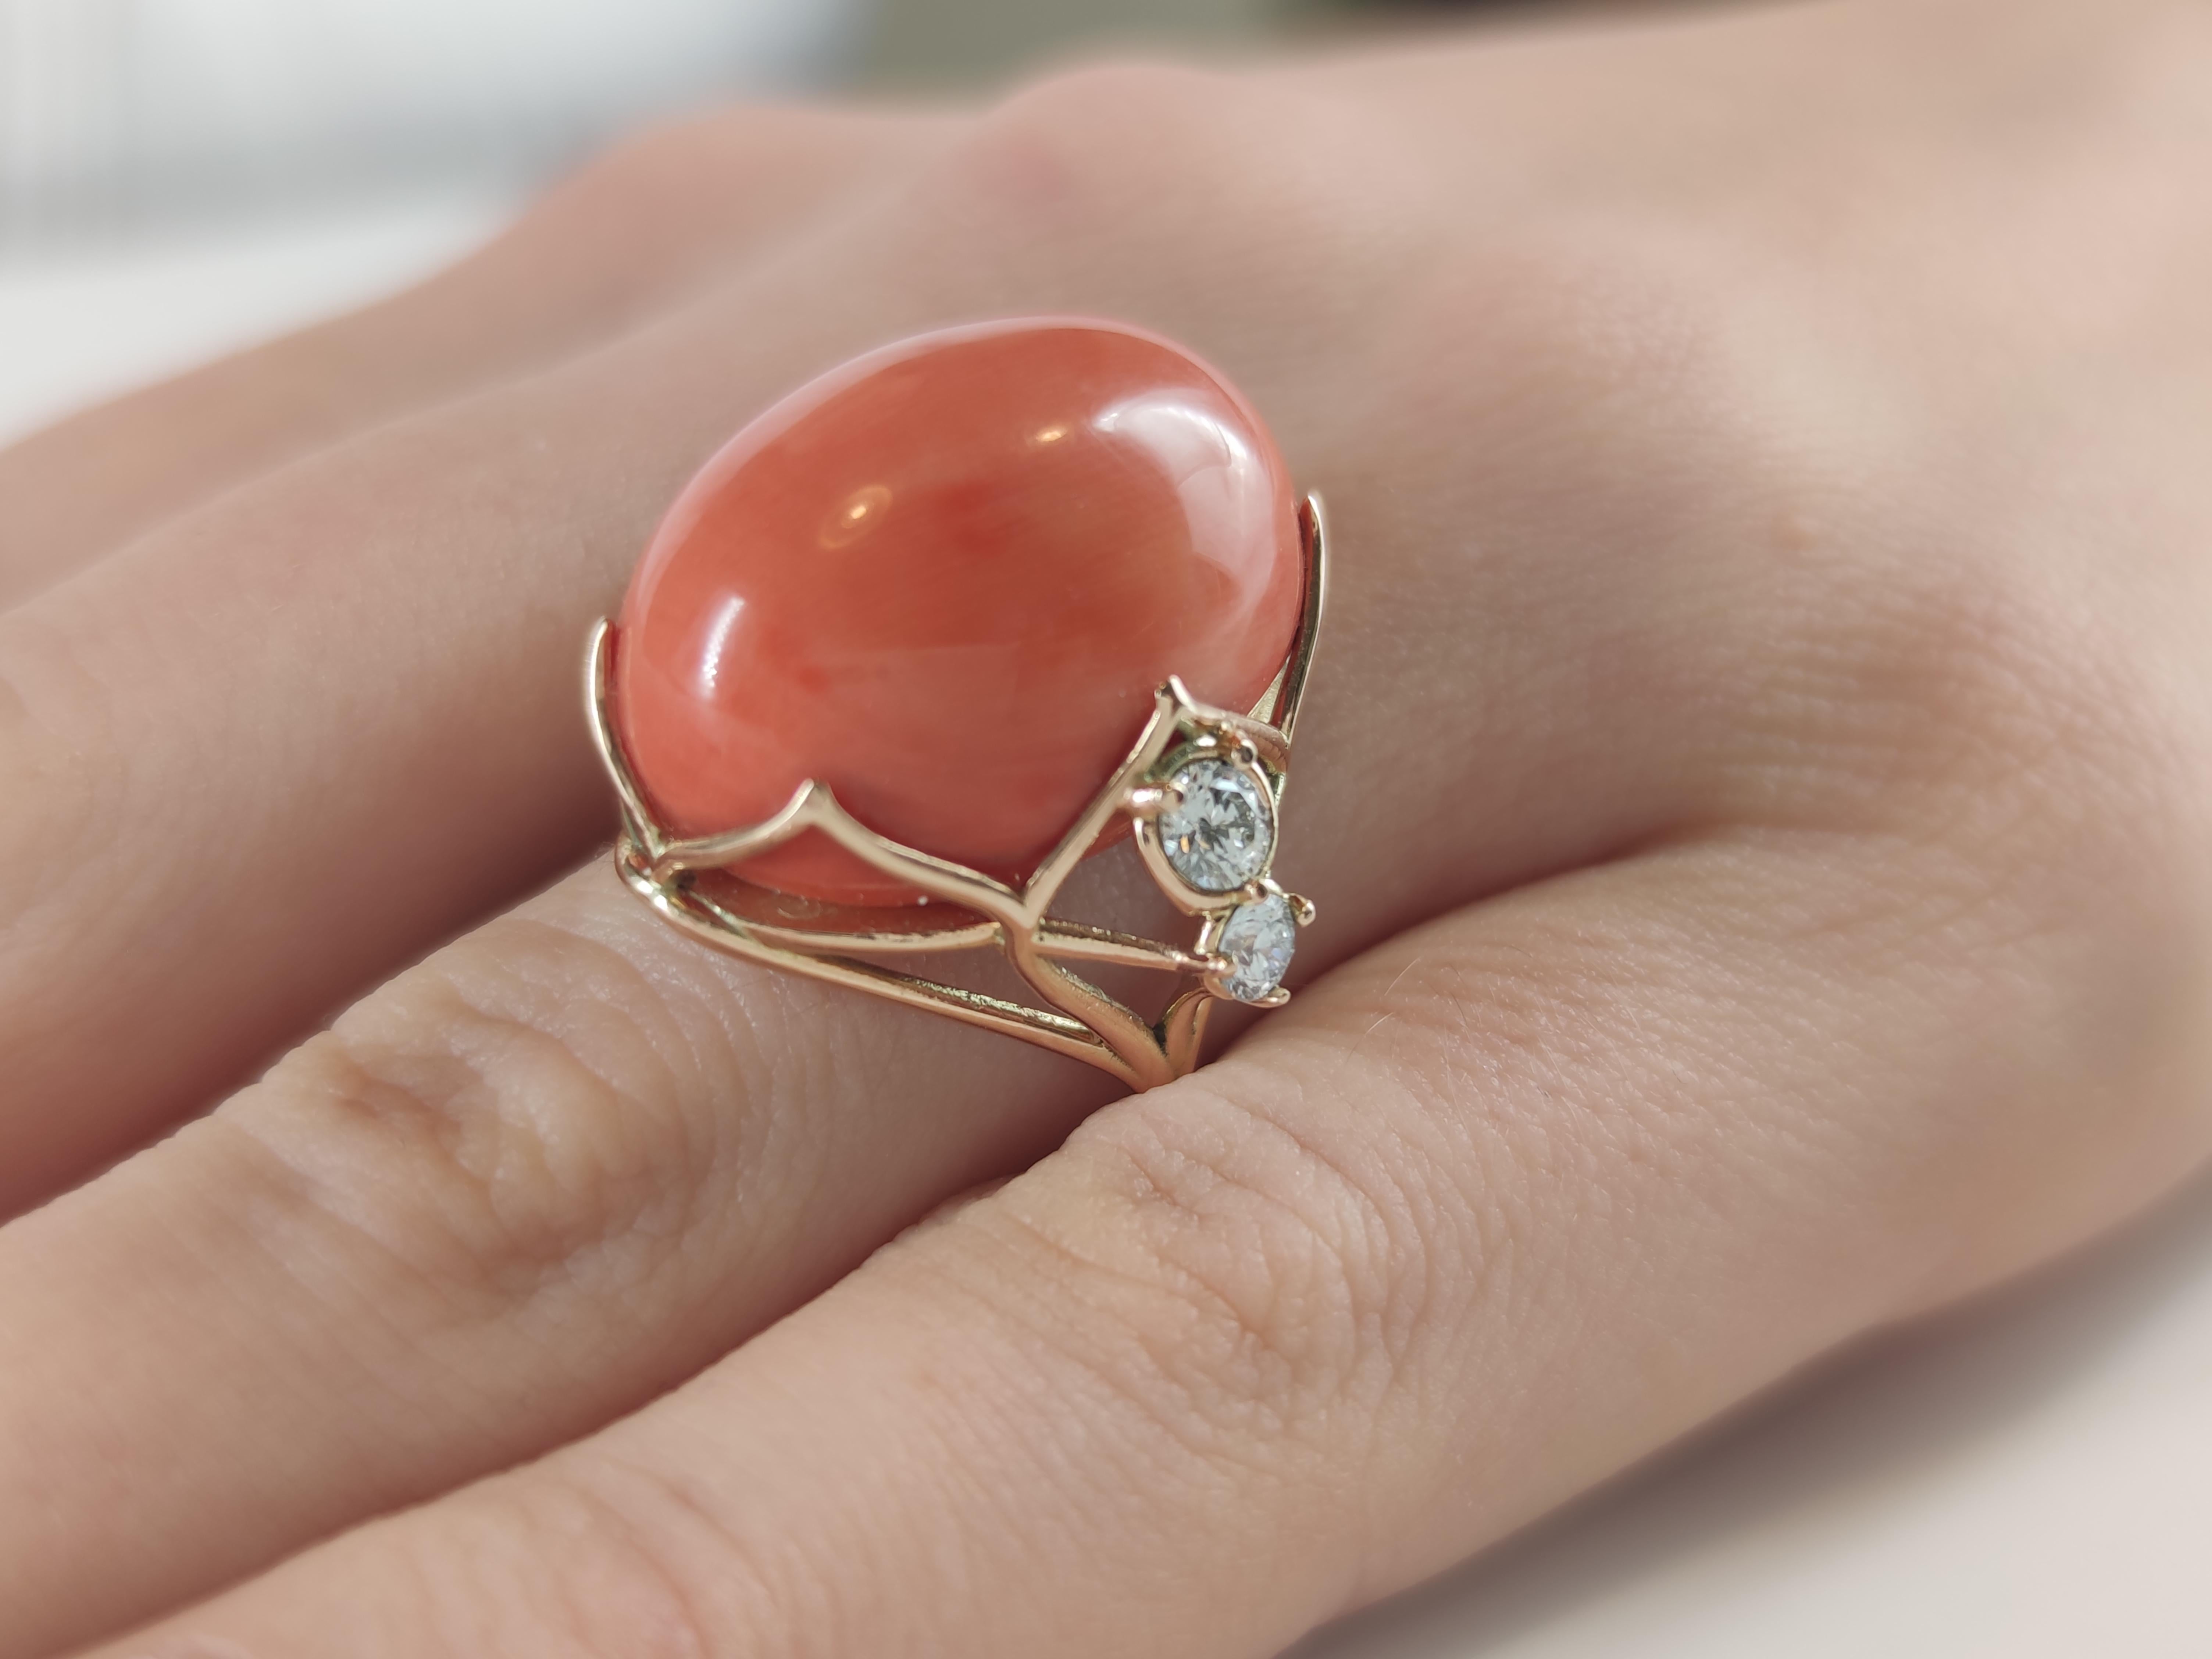 Sculptural author’s ring with 33.49 ct red Coral and Diamonds - Unique and unrepeatable jewel
This stunning author’s ring is a unique and unrepeatable piece, both for the exceptional gems that compose it and for its handmade mount. Every detail has